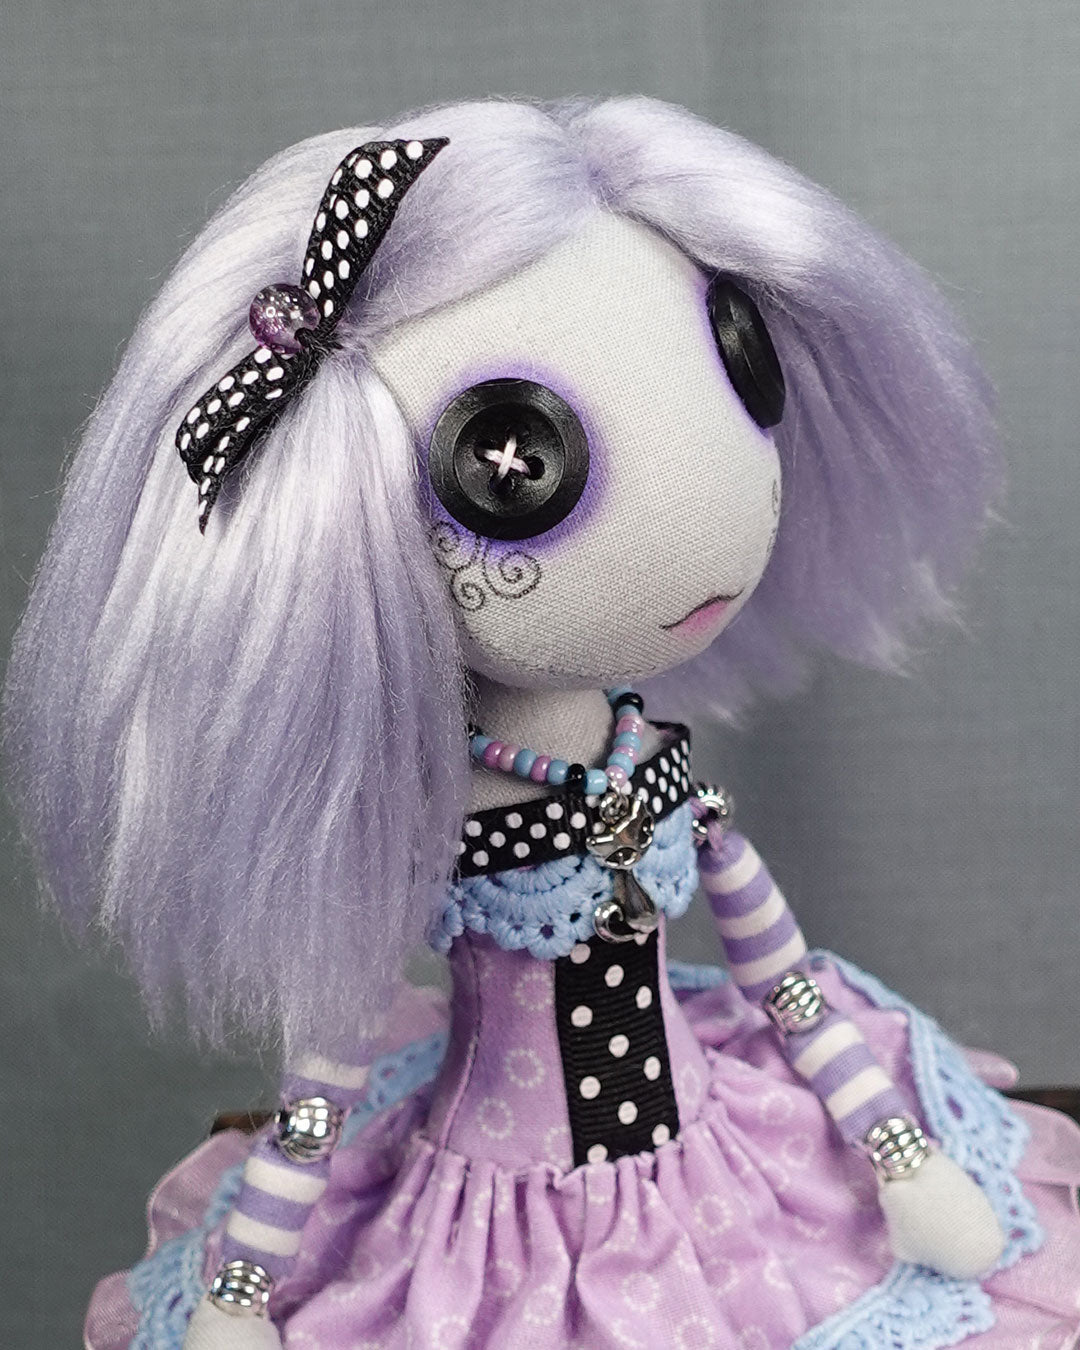 close up of button eyed doll with pastel lavender hair and polka dot bow